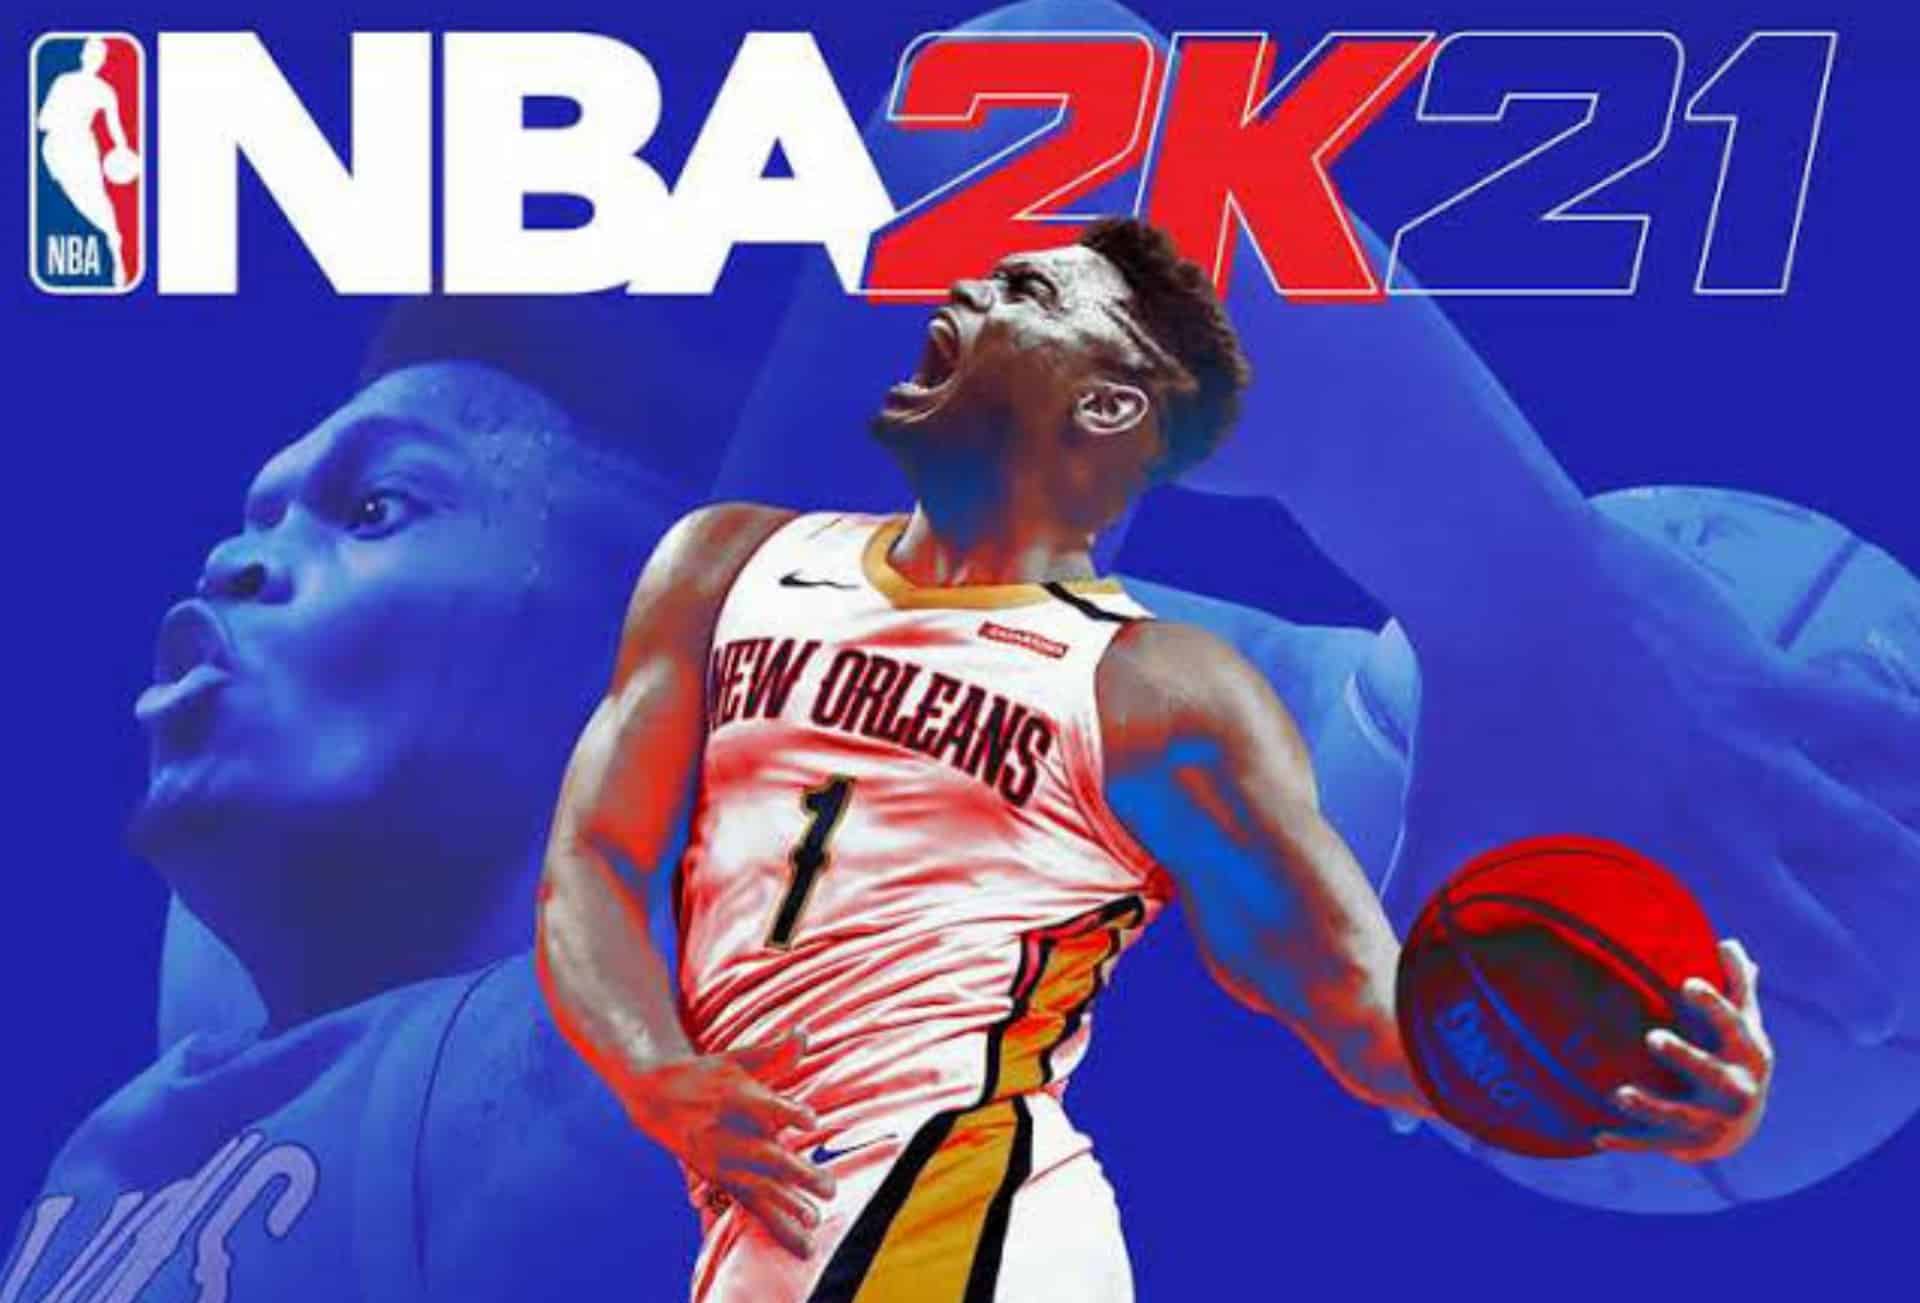 NBA 2K21 Adds Unskippable In-game Ads Despite Being A Full-Price Game